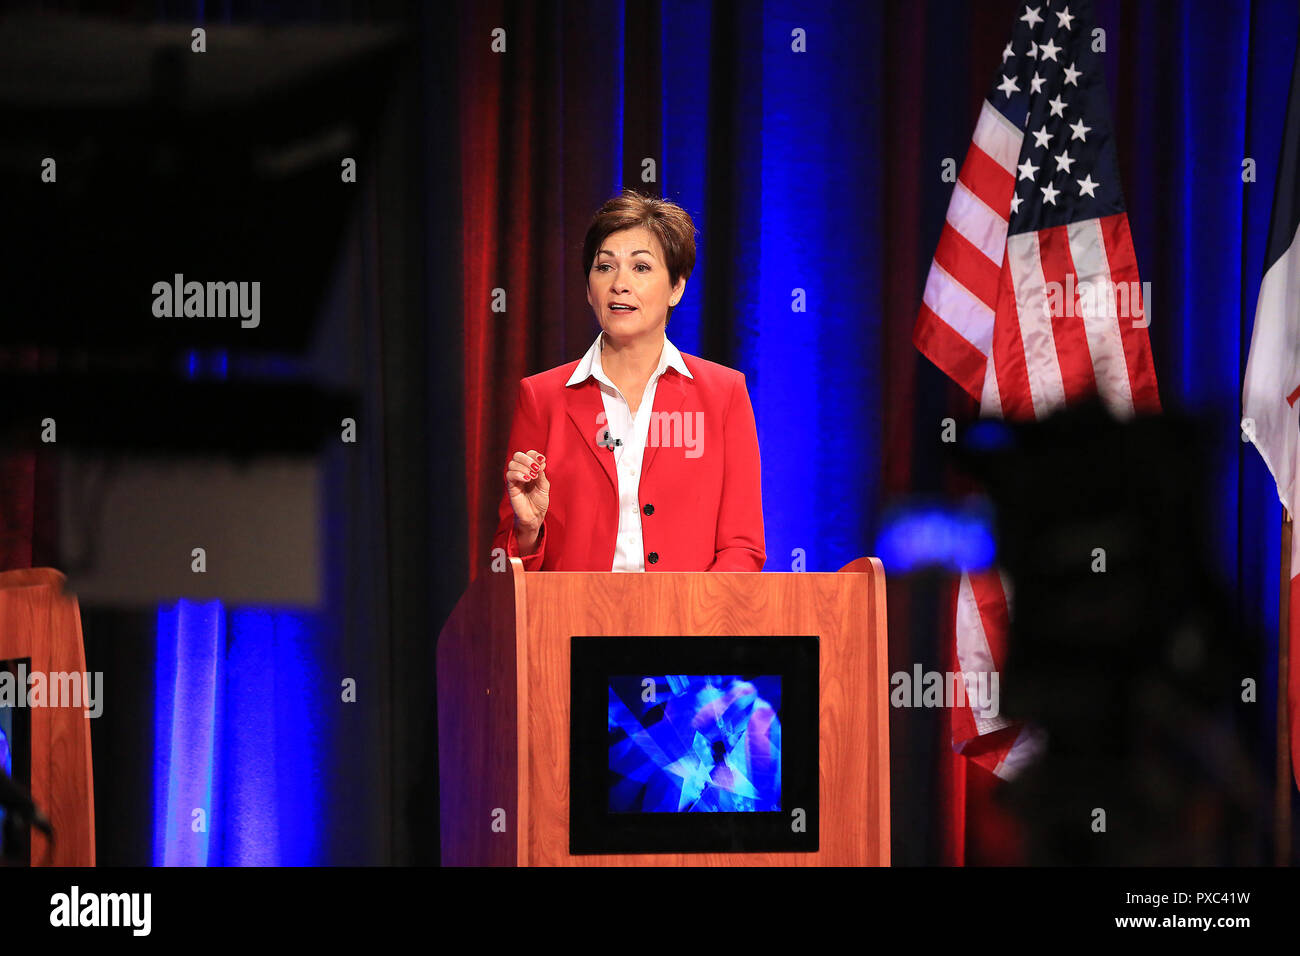 Davenport, Iowa, USA. 21st Oct, 2018. Iowa Governor Kim Reynolds responds to a question during the last of three debates Sunday morning, October 21, 2018 in the KWQC studios in Davenport, Iowa. Credit: Kevin E. Schmidt/Quad-City Times/ZUMA Wire/Alamy Live News Stock Photo